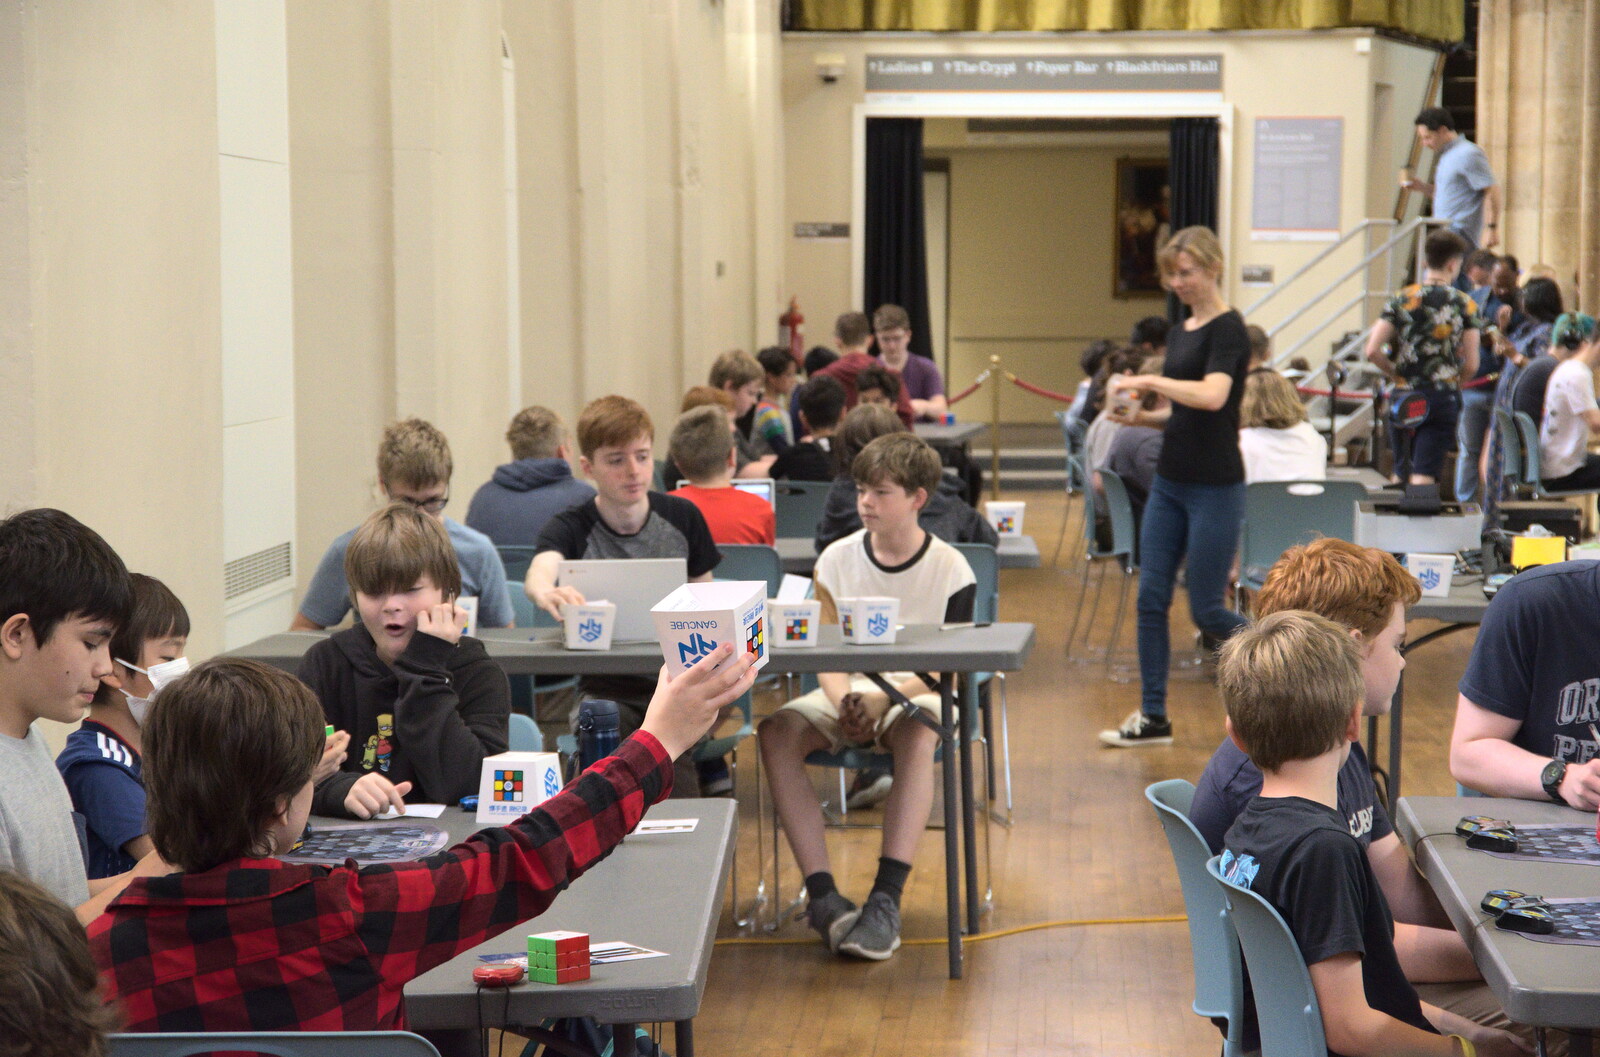 The World Cube Association Rubik's Competition, St. Andrew's Hall, Norwich - 31st July 2022: Cube muddling is required